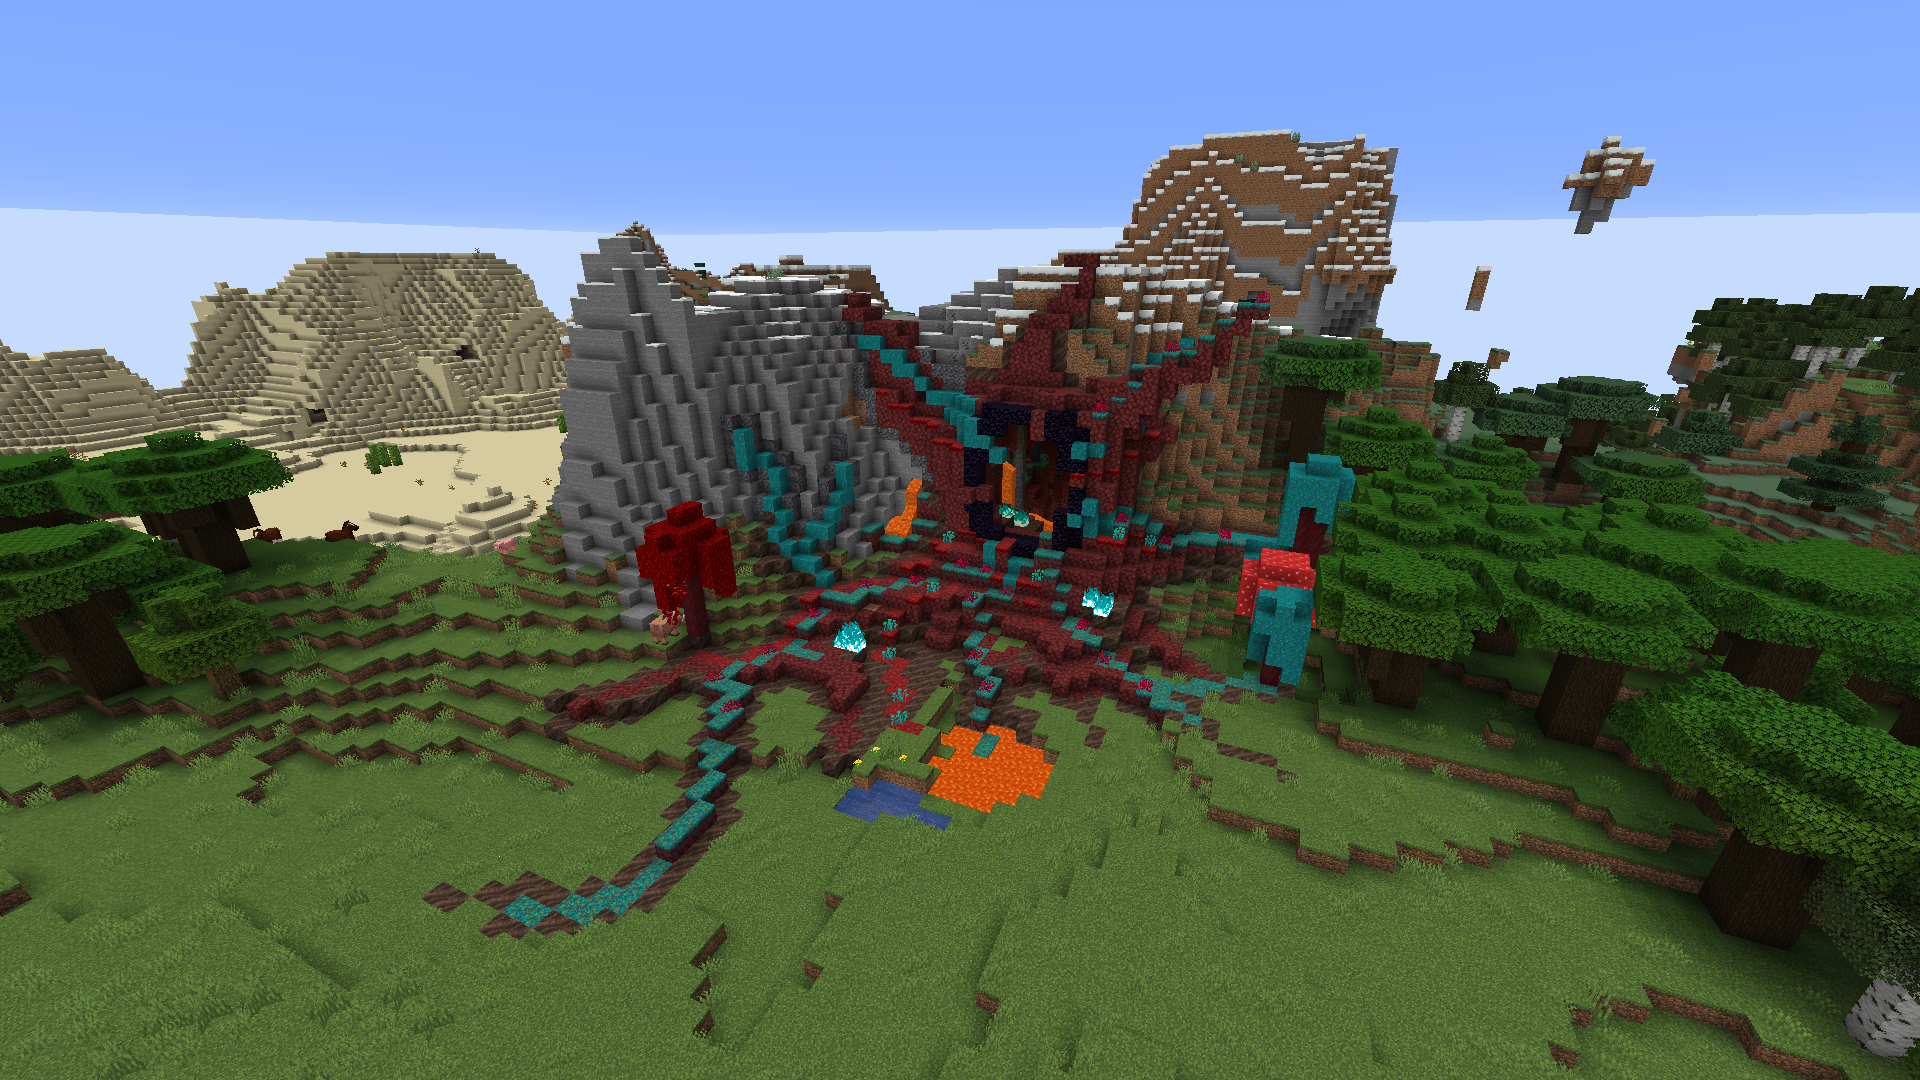 We built The Nether corrupting the Overworld